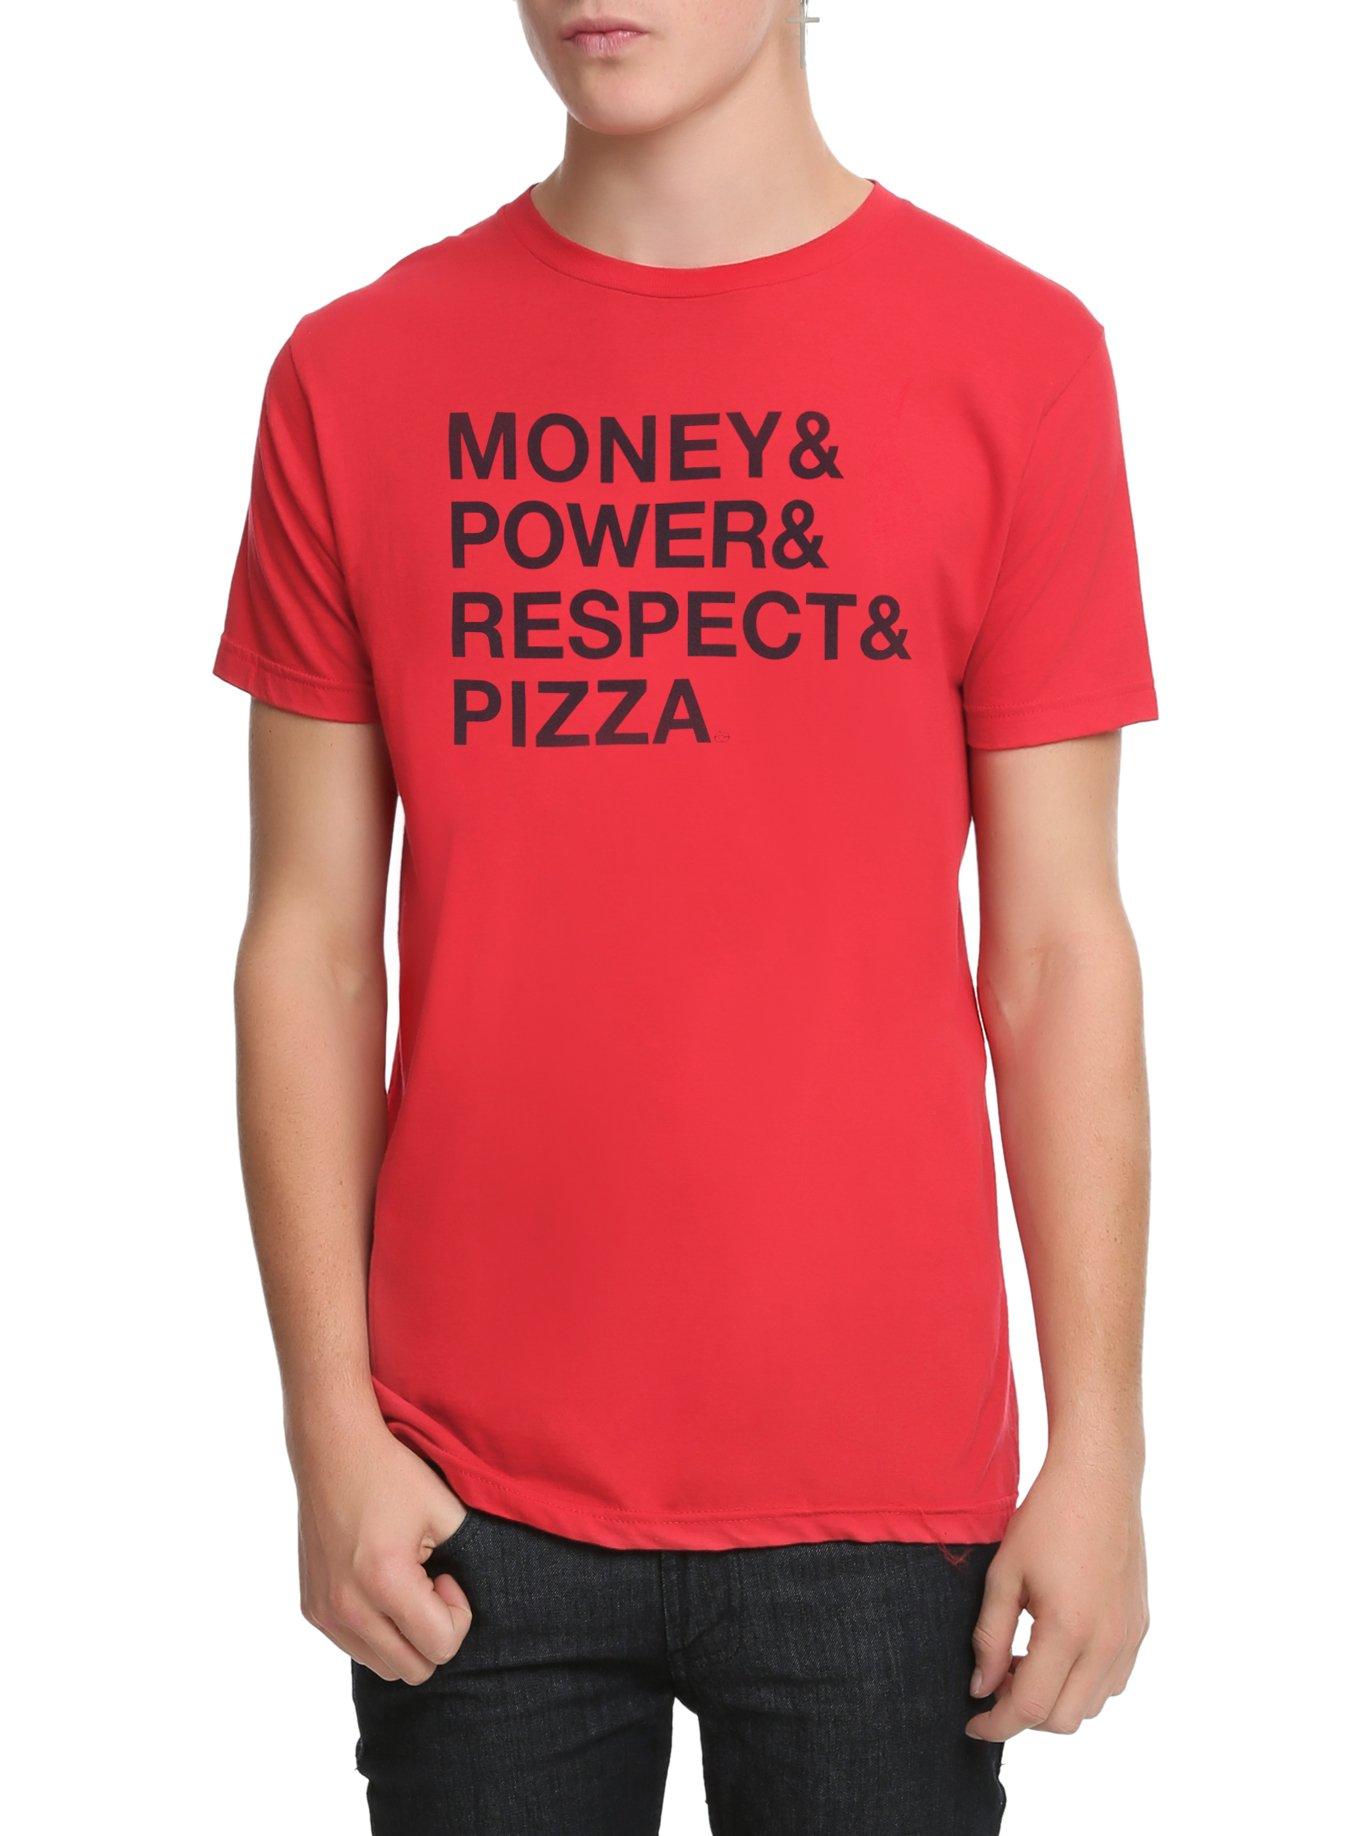 Money Power Respect Pizza T-Shirt, RED, hi-res